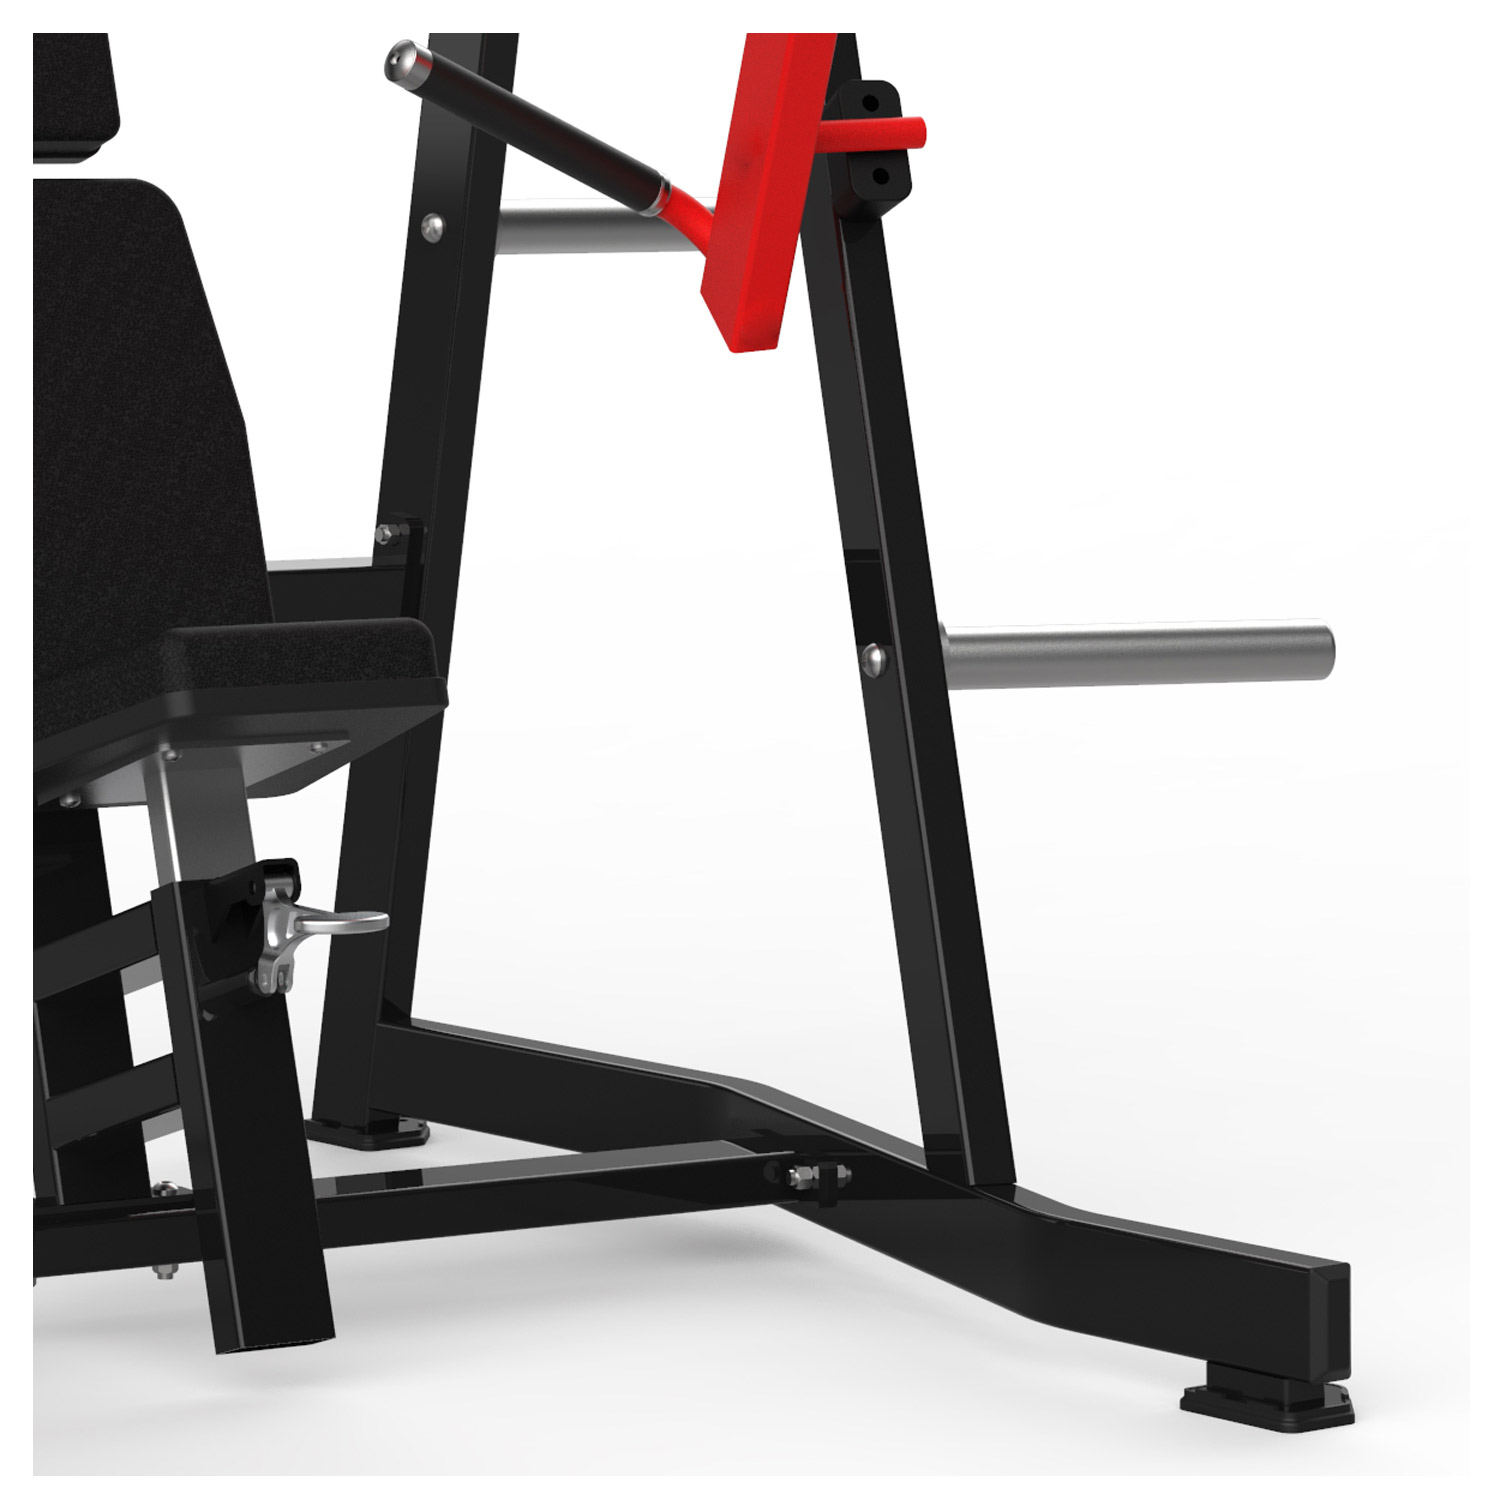 HS-1003 Iso-Lateral Chest Press